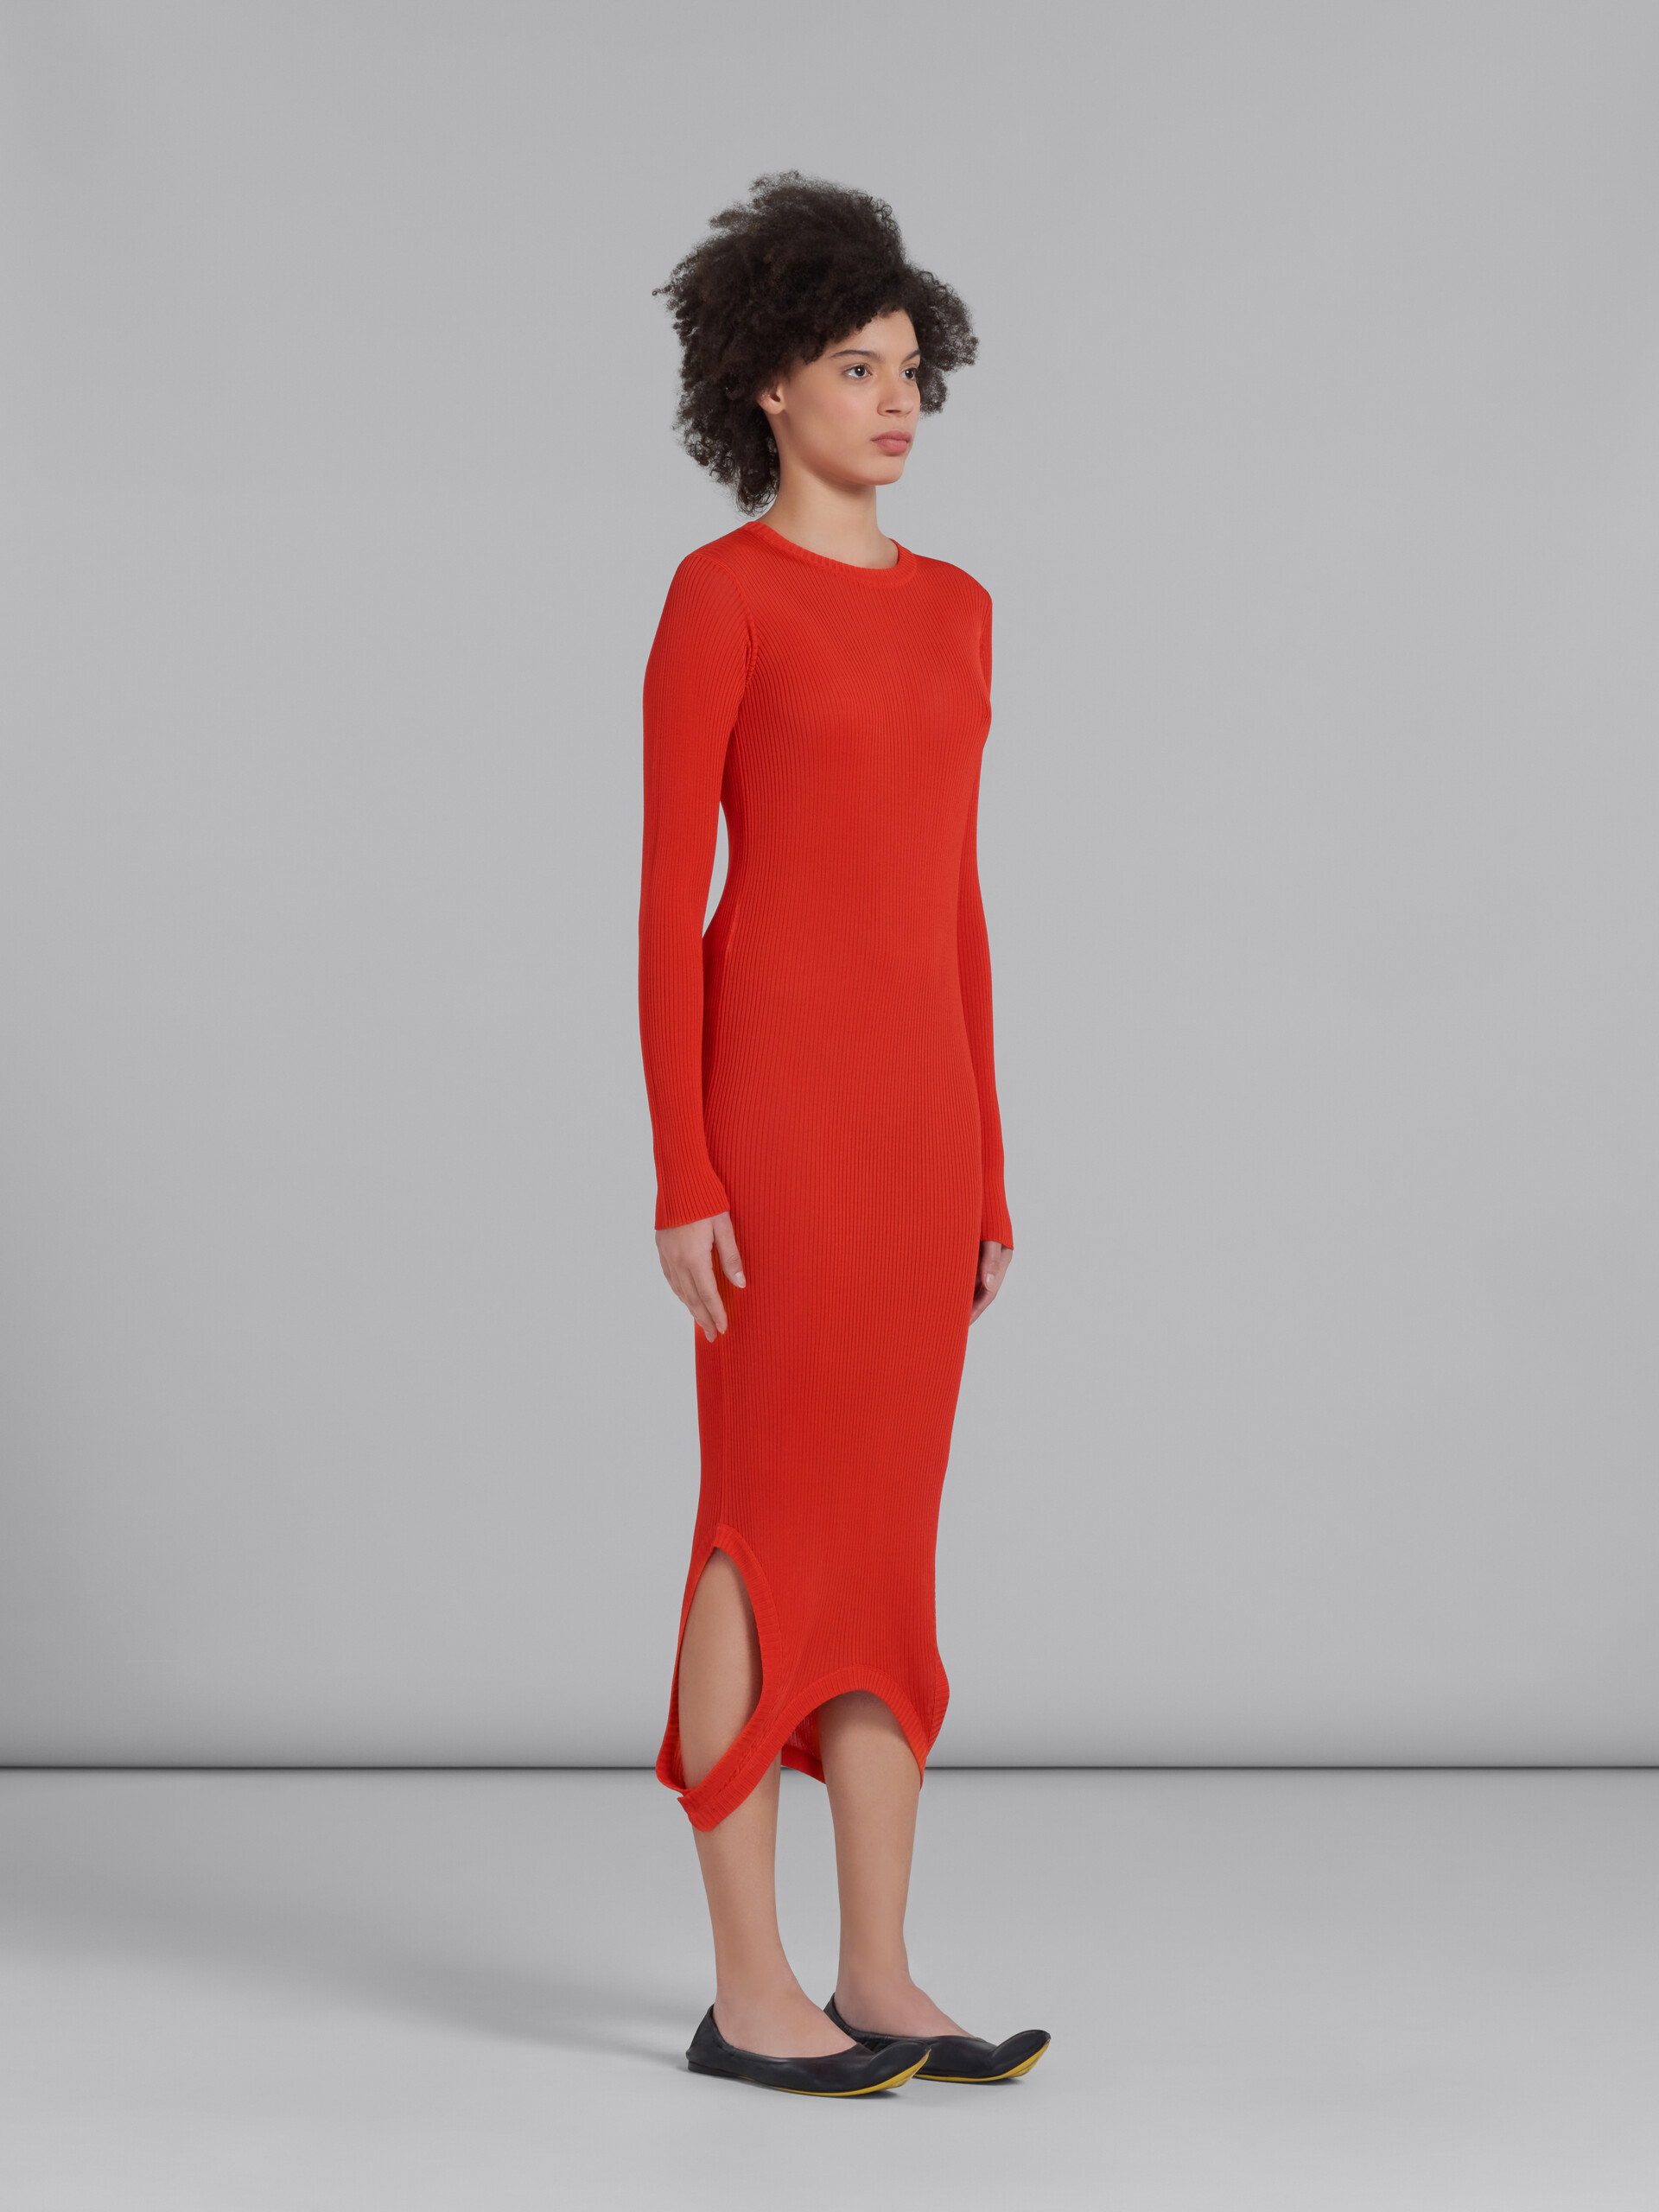 Red ribbed dress with press buttons - Pullovers - Image 6